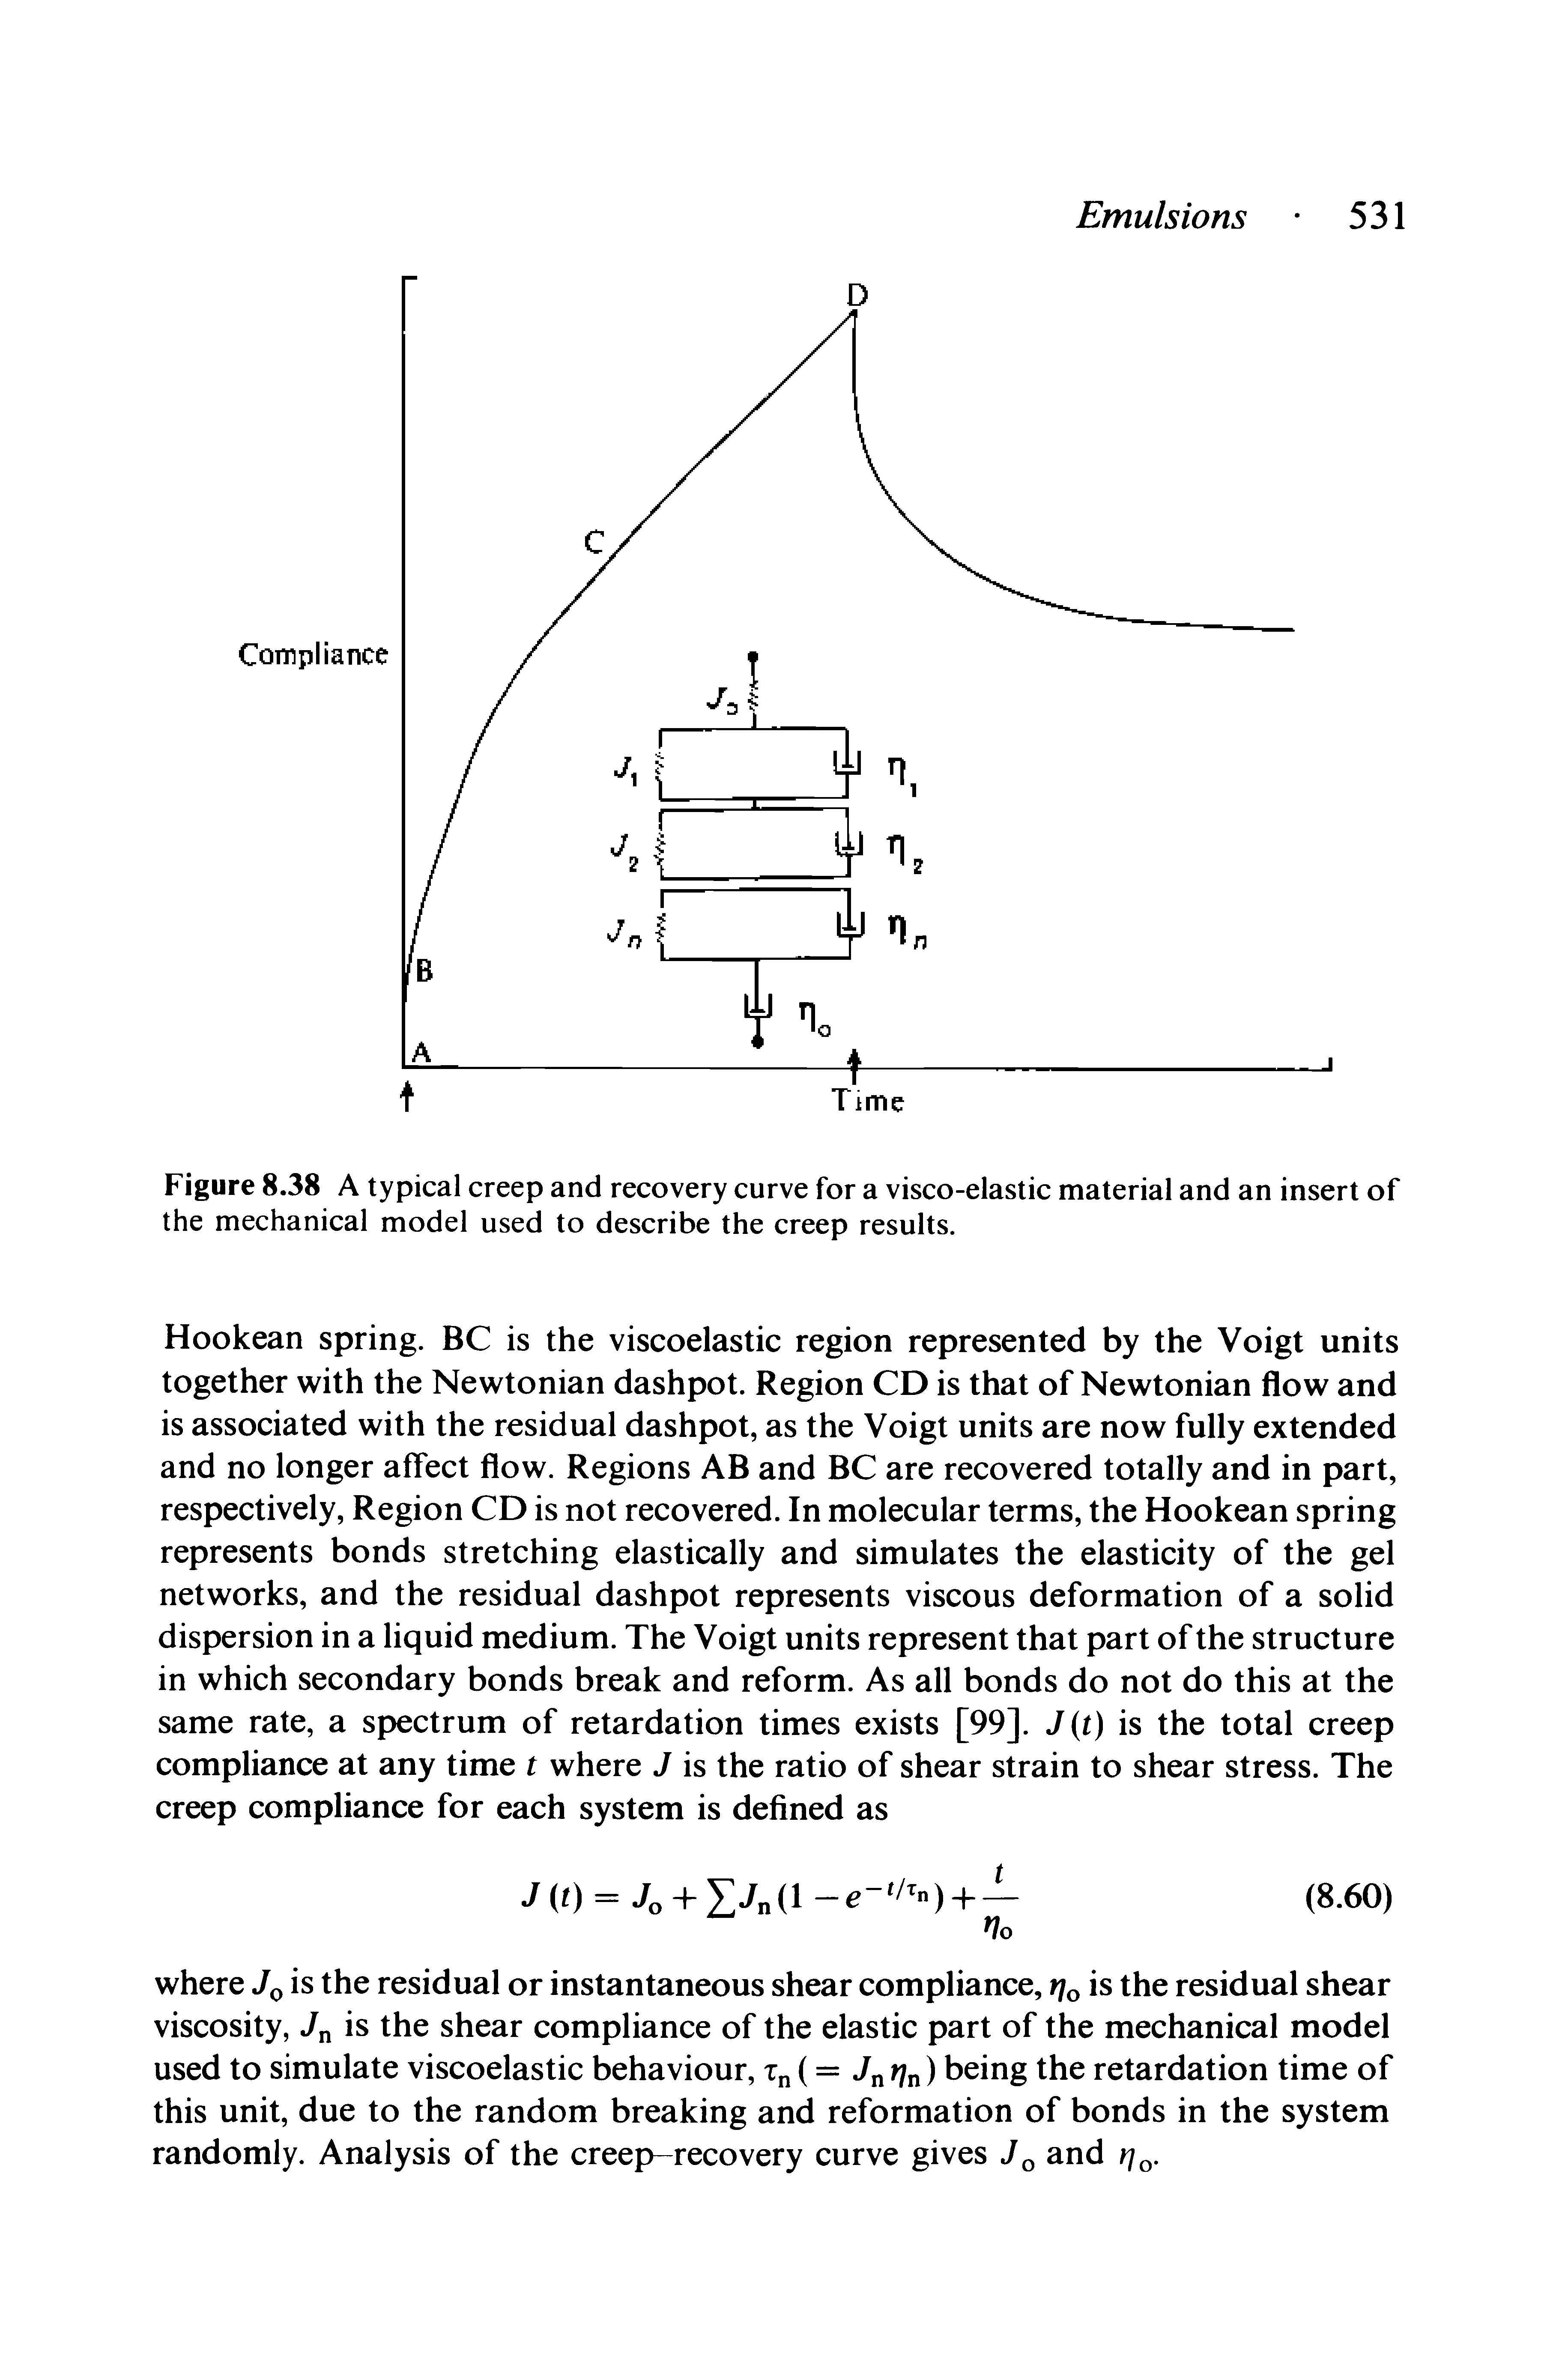 Figure 8.38 A typical creep and recovery curve for a visco-elastic material and an insert of the mechanical model used to describe the creep results.